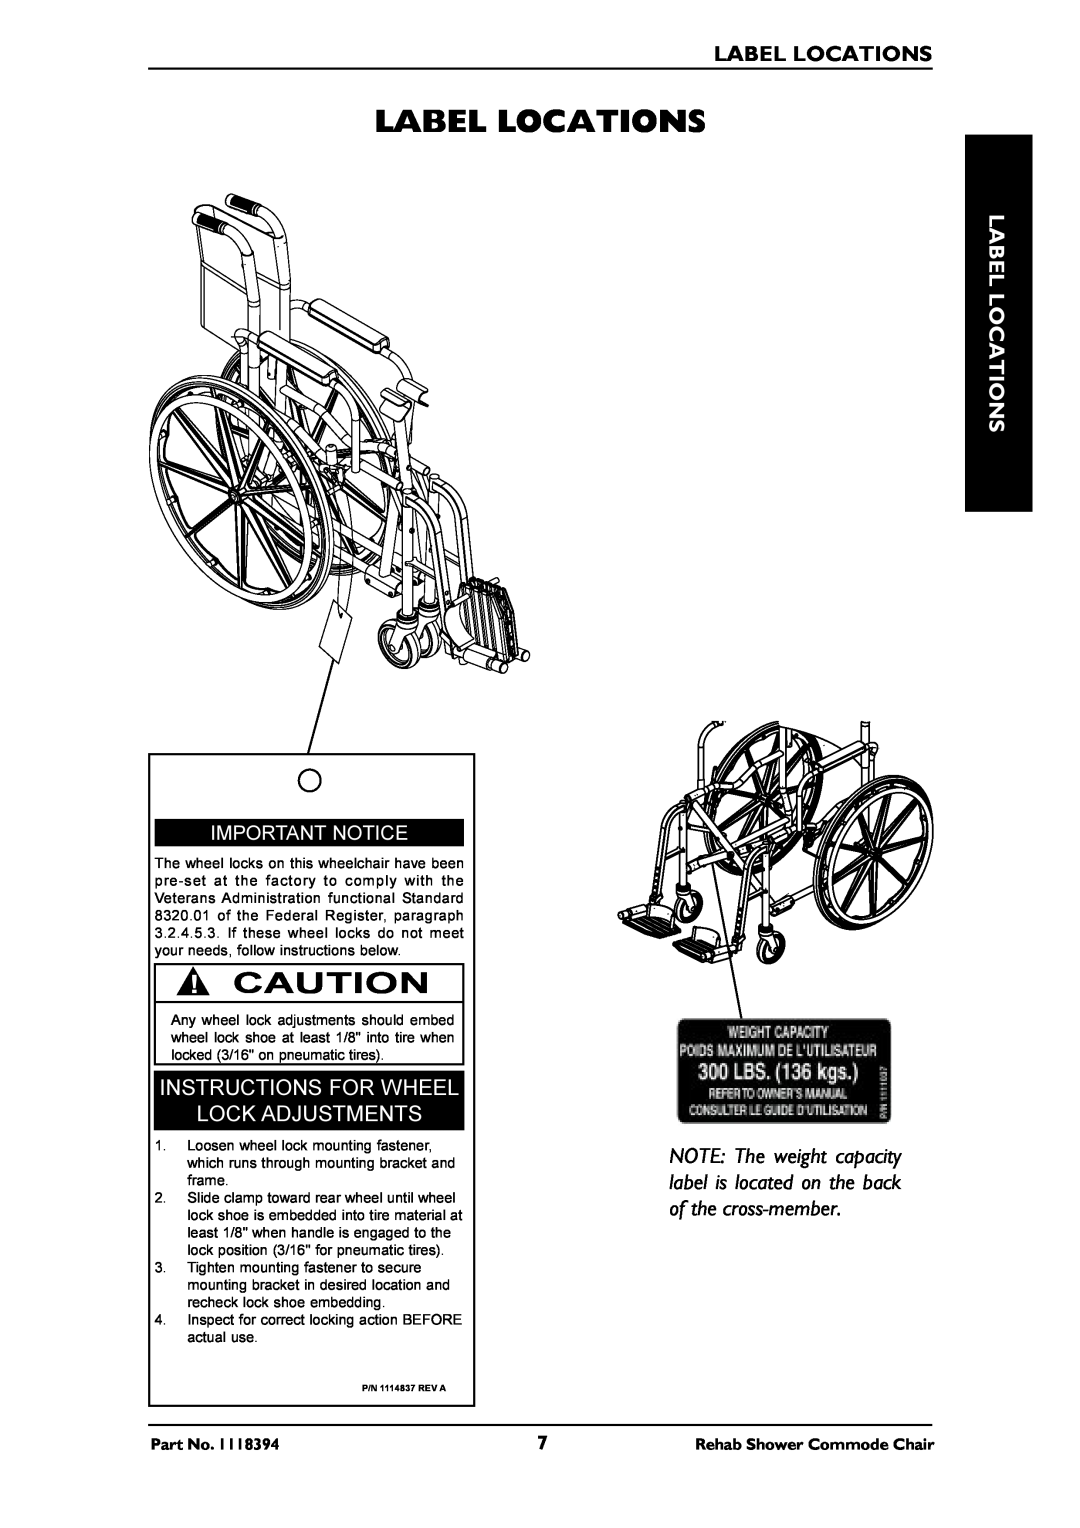 Invacare 6895, 6795 Label Locations, Instructions For Wheel Lock Adjustments, Important Notice, Rehab Shower Commode Chair 